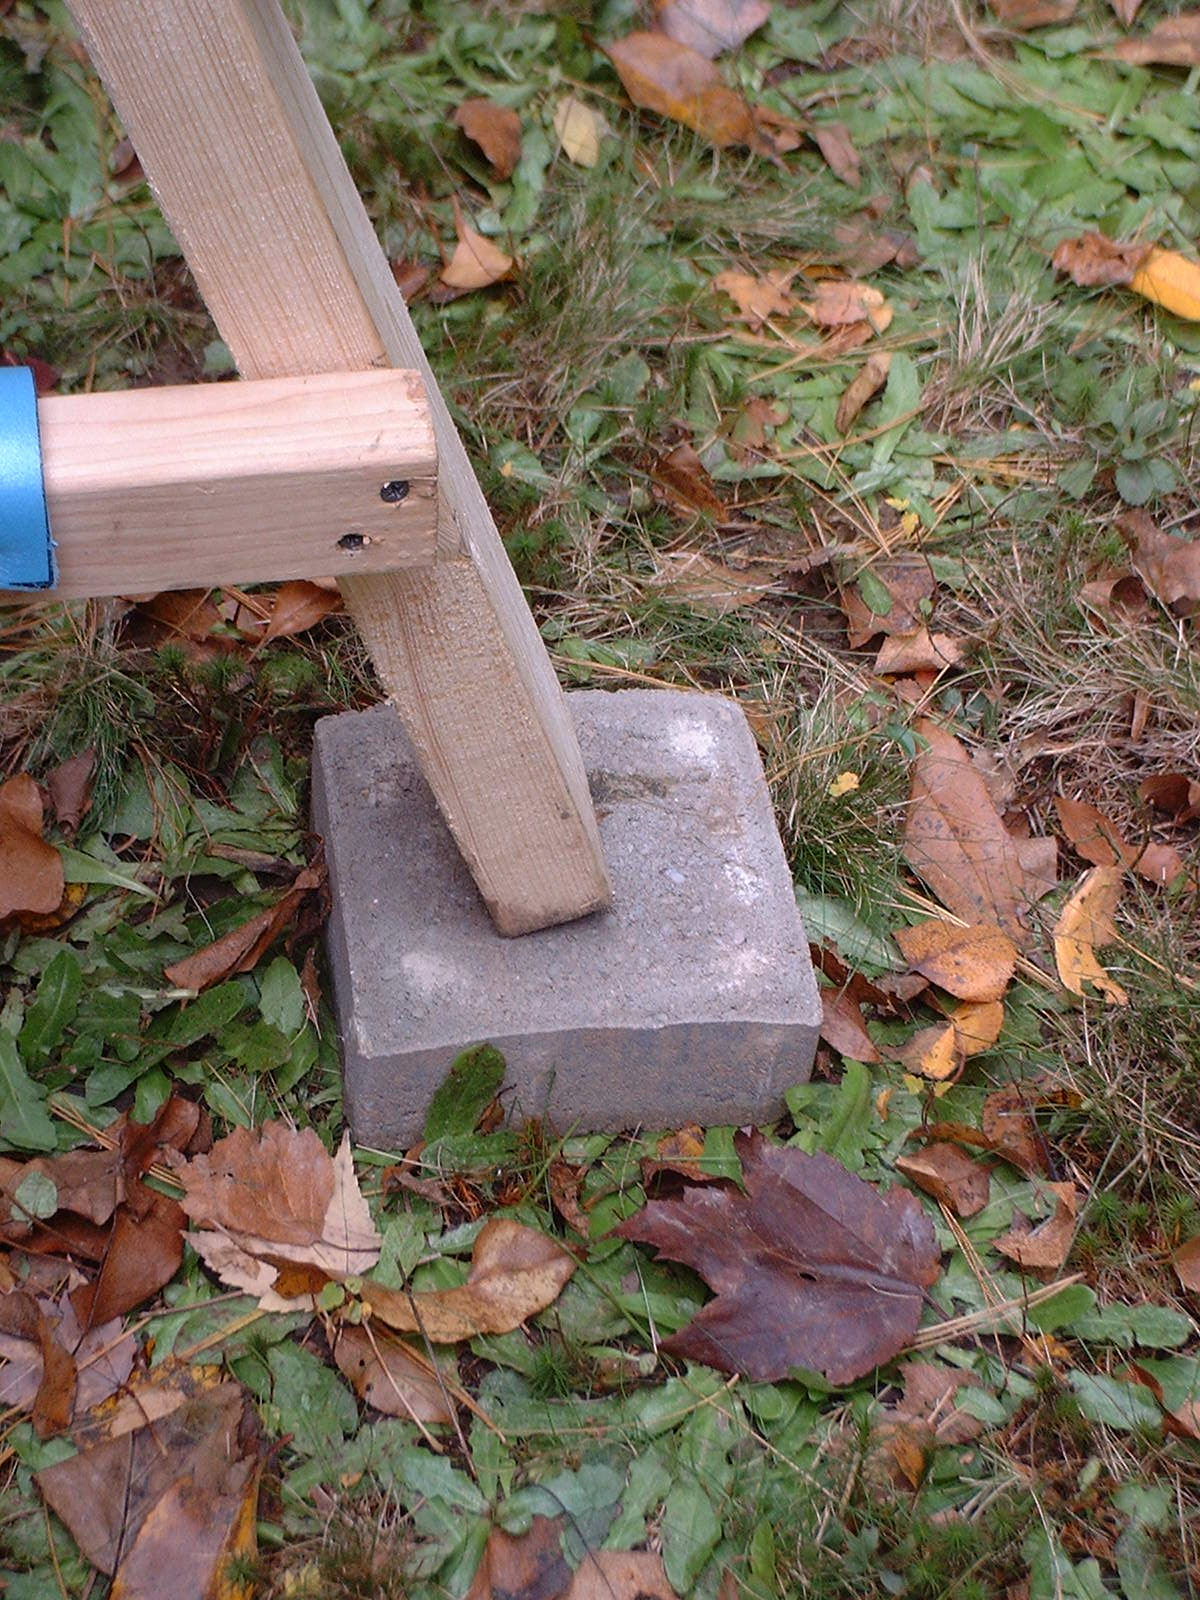 6" square cobble blocks used to support the A-frame kayak rack off the ground